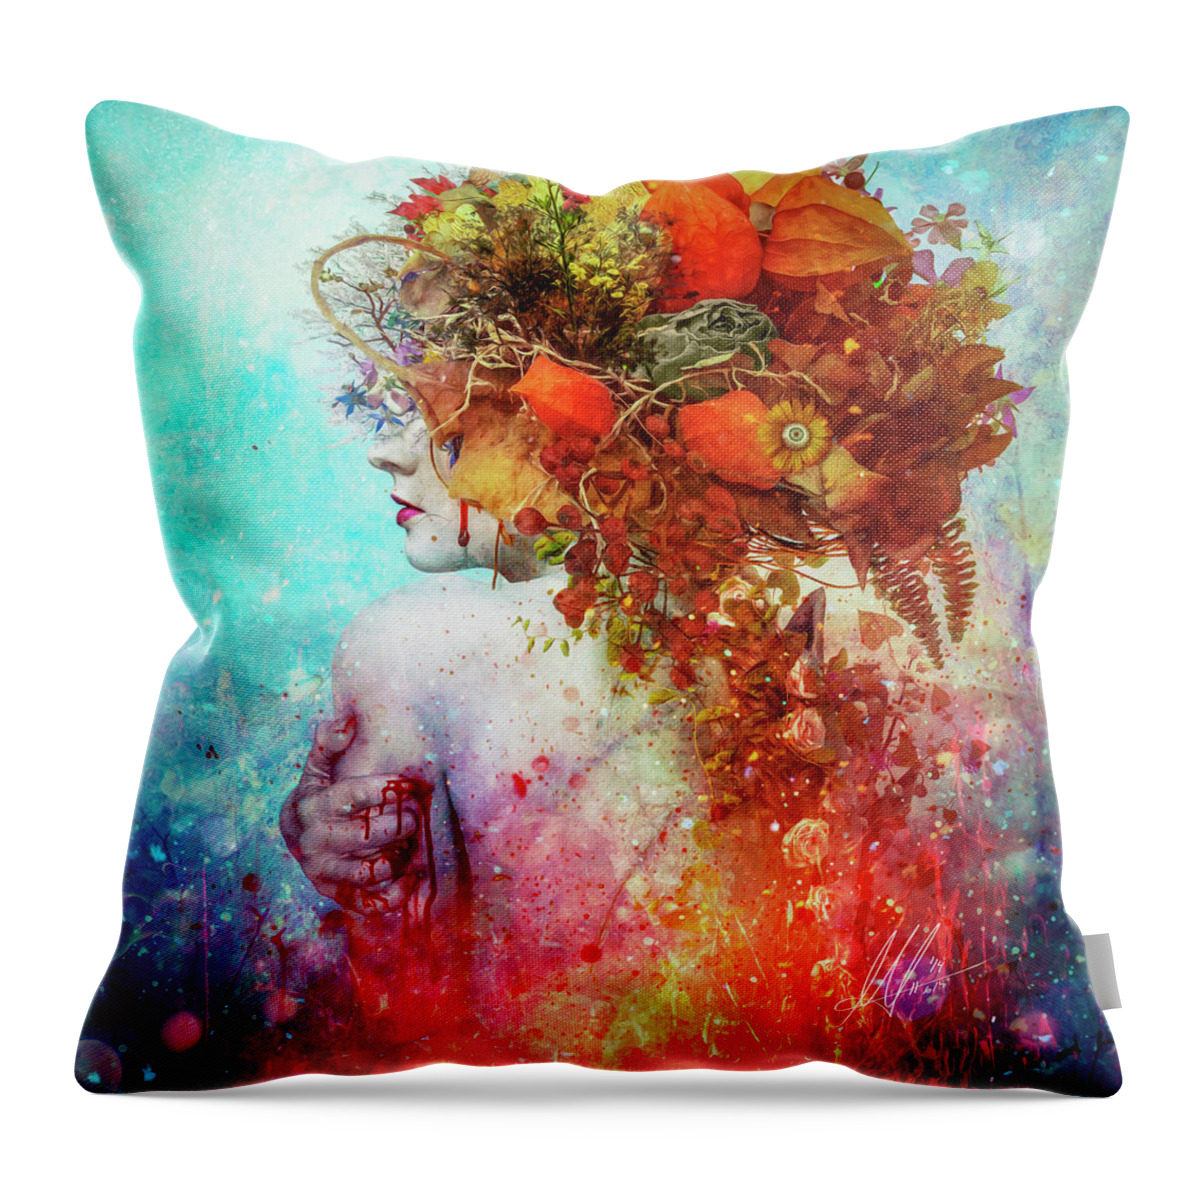 Surreal Throw Pillow featuring the digital art Compassion by Mario Sanchez Nevado